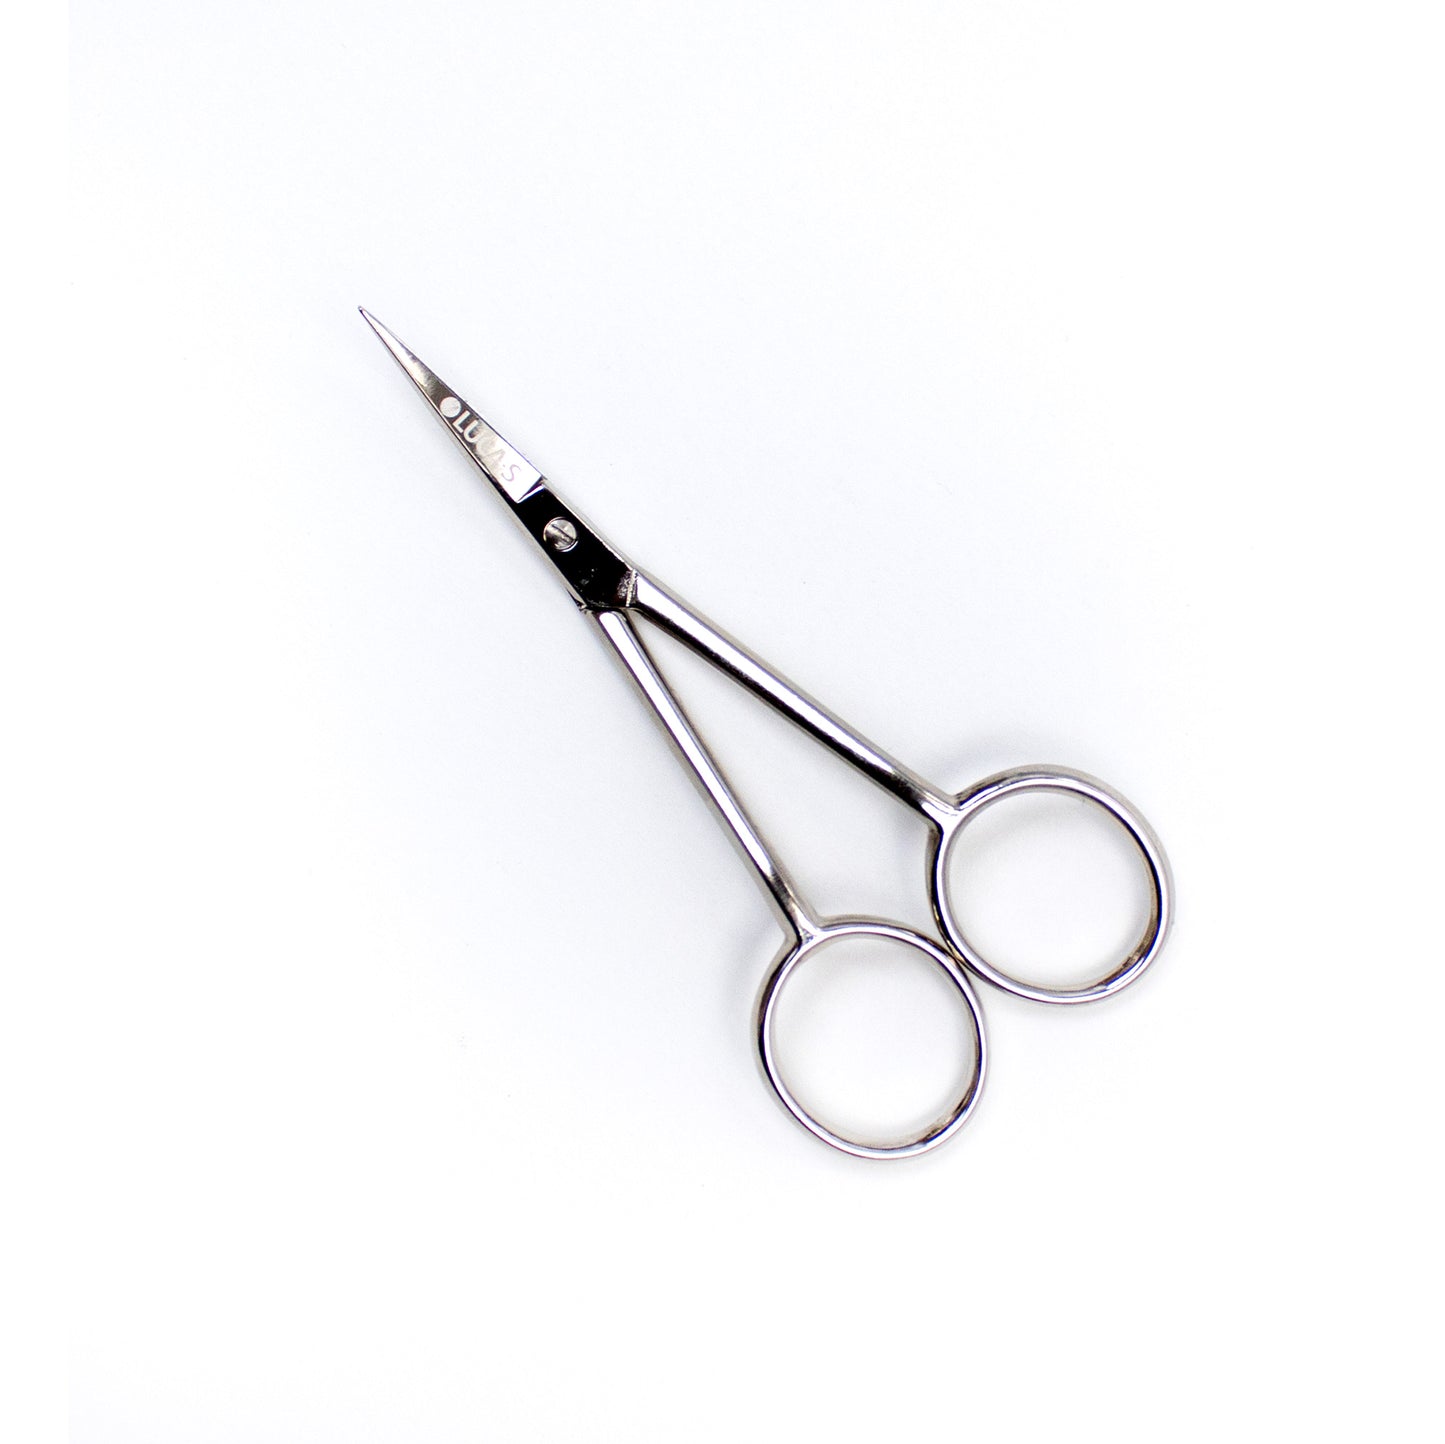 Embroidery Scissors Luca-S - SEWING SCISSORS CURVED HANDLES AND BLADES